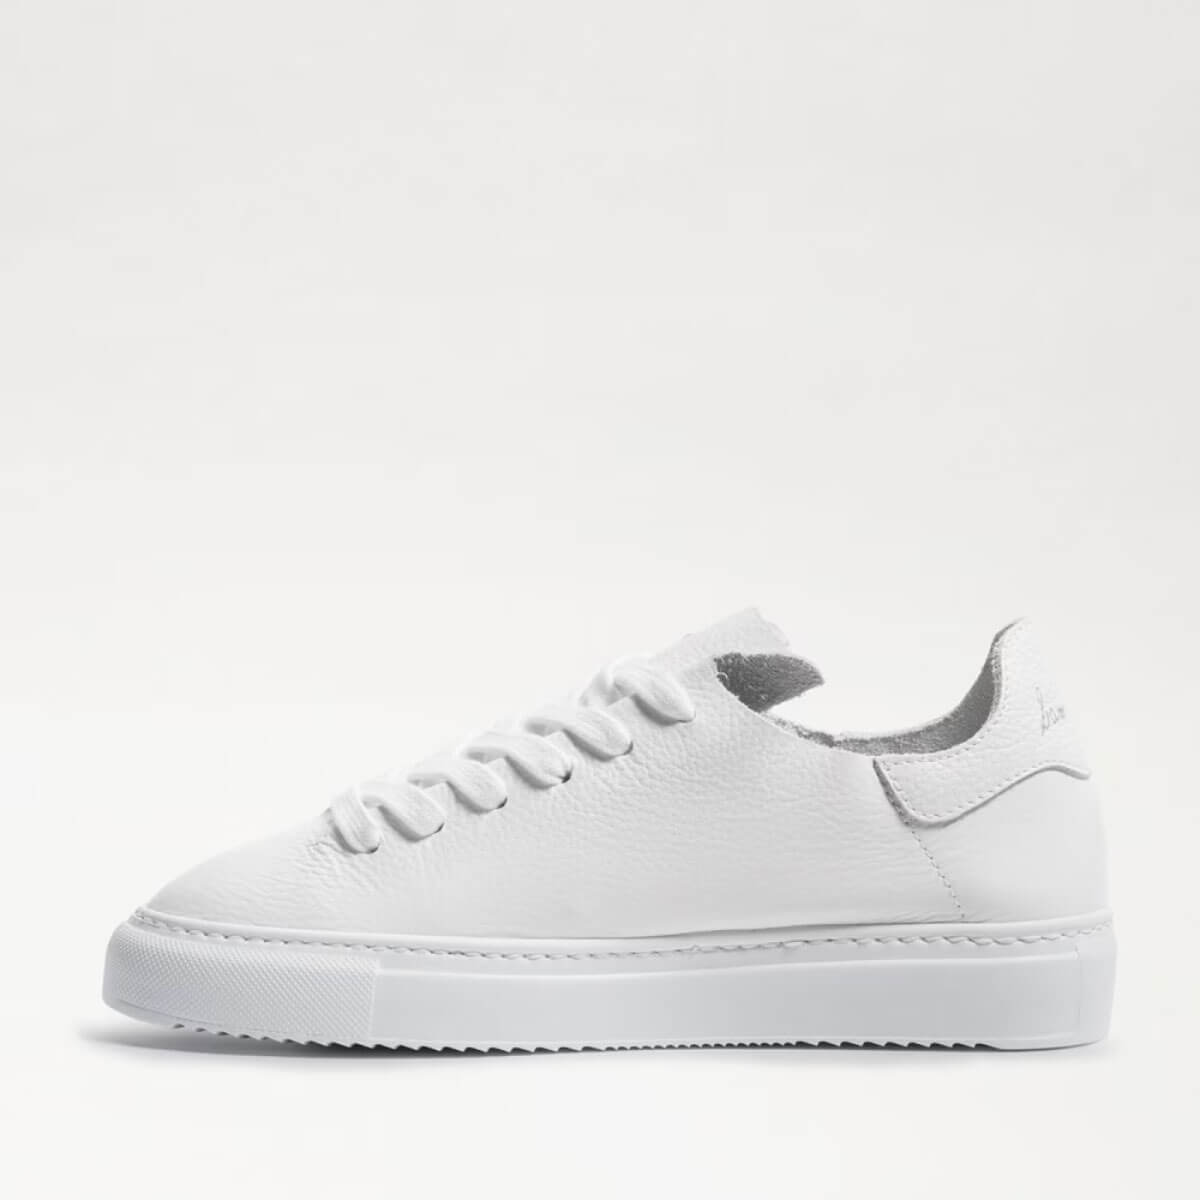 Sam Edelman Poppy Lace-Up Sneaker white side | MILK MONEY milkmoney.co | cute shoes for women. ladies shoes. nice shoes for women. footwear for women. ladies shoes online. ladies footwear. womens shoes and boots. pretty shoes for women. beautiful shoes for women.